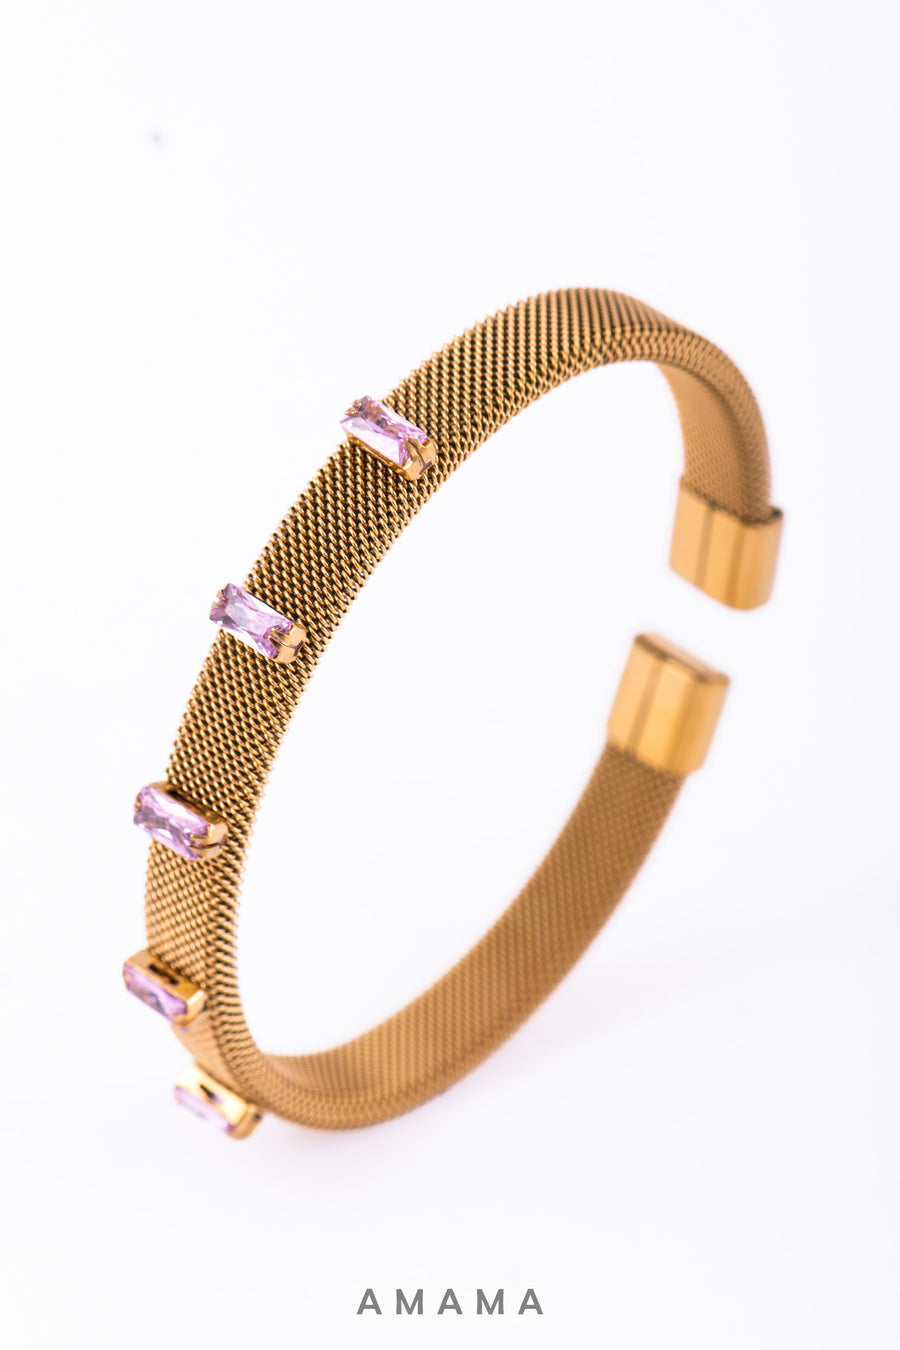 Golden Bangles with baby pink stones